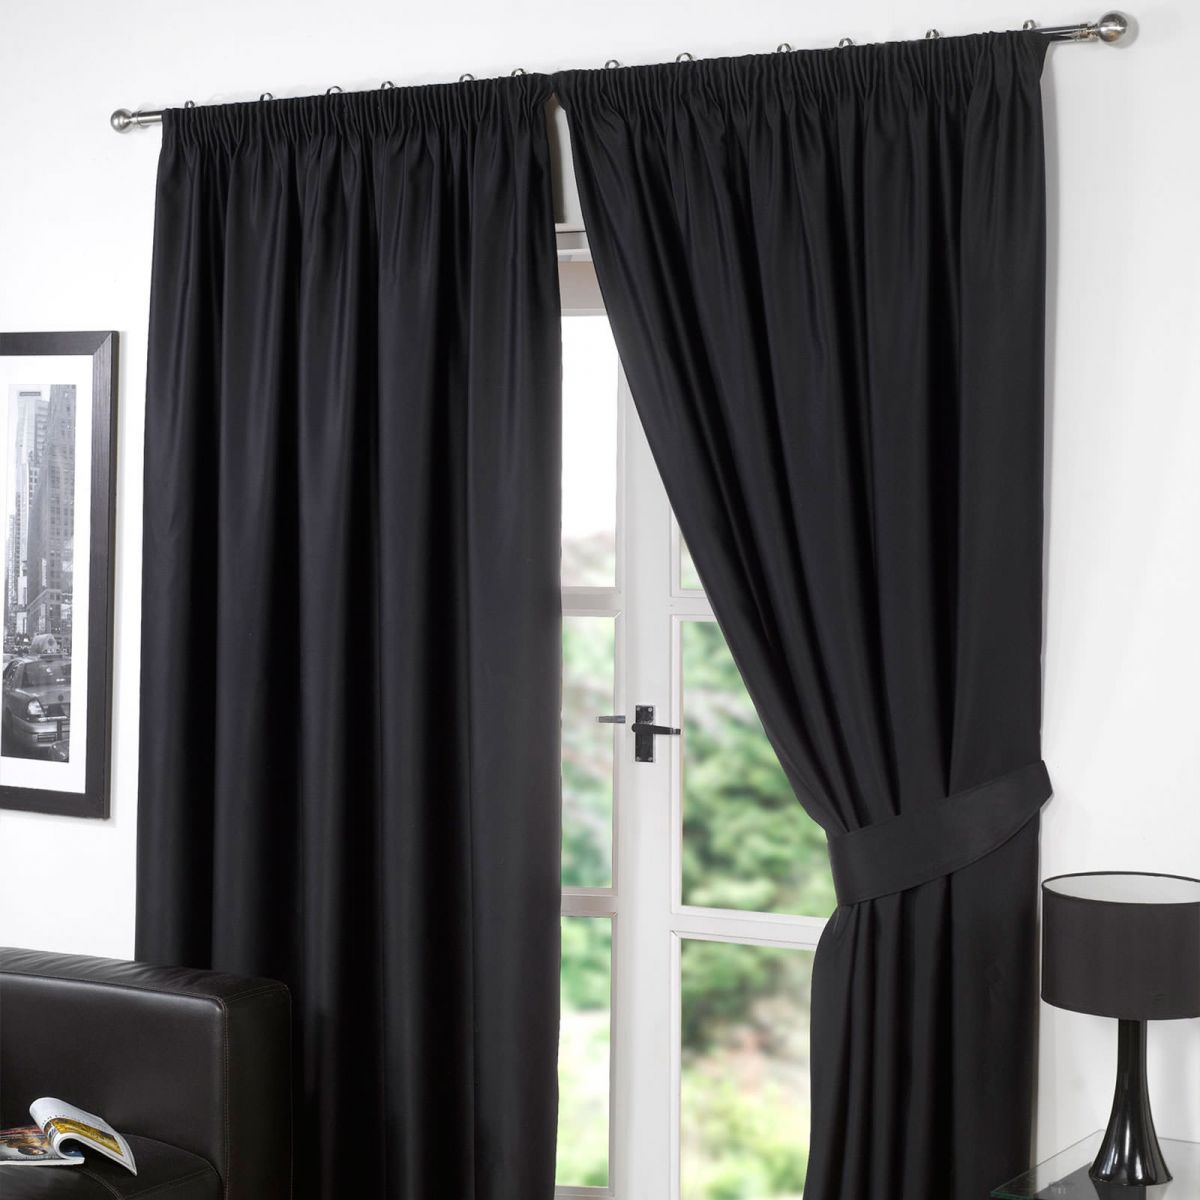 Pencil Pleat Thermal Blackout Fully Lined Curtains - Black 46x54